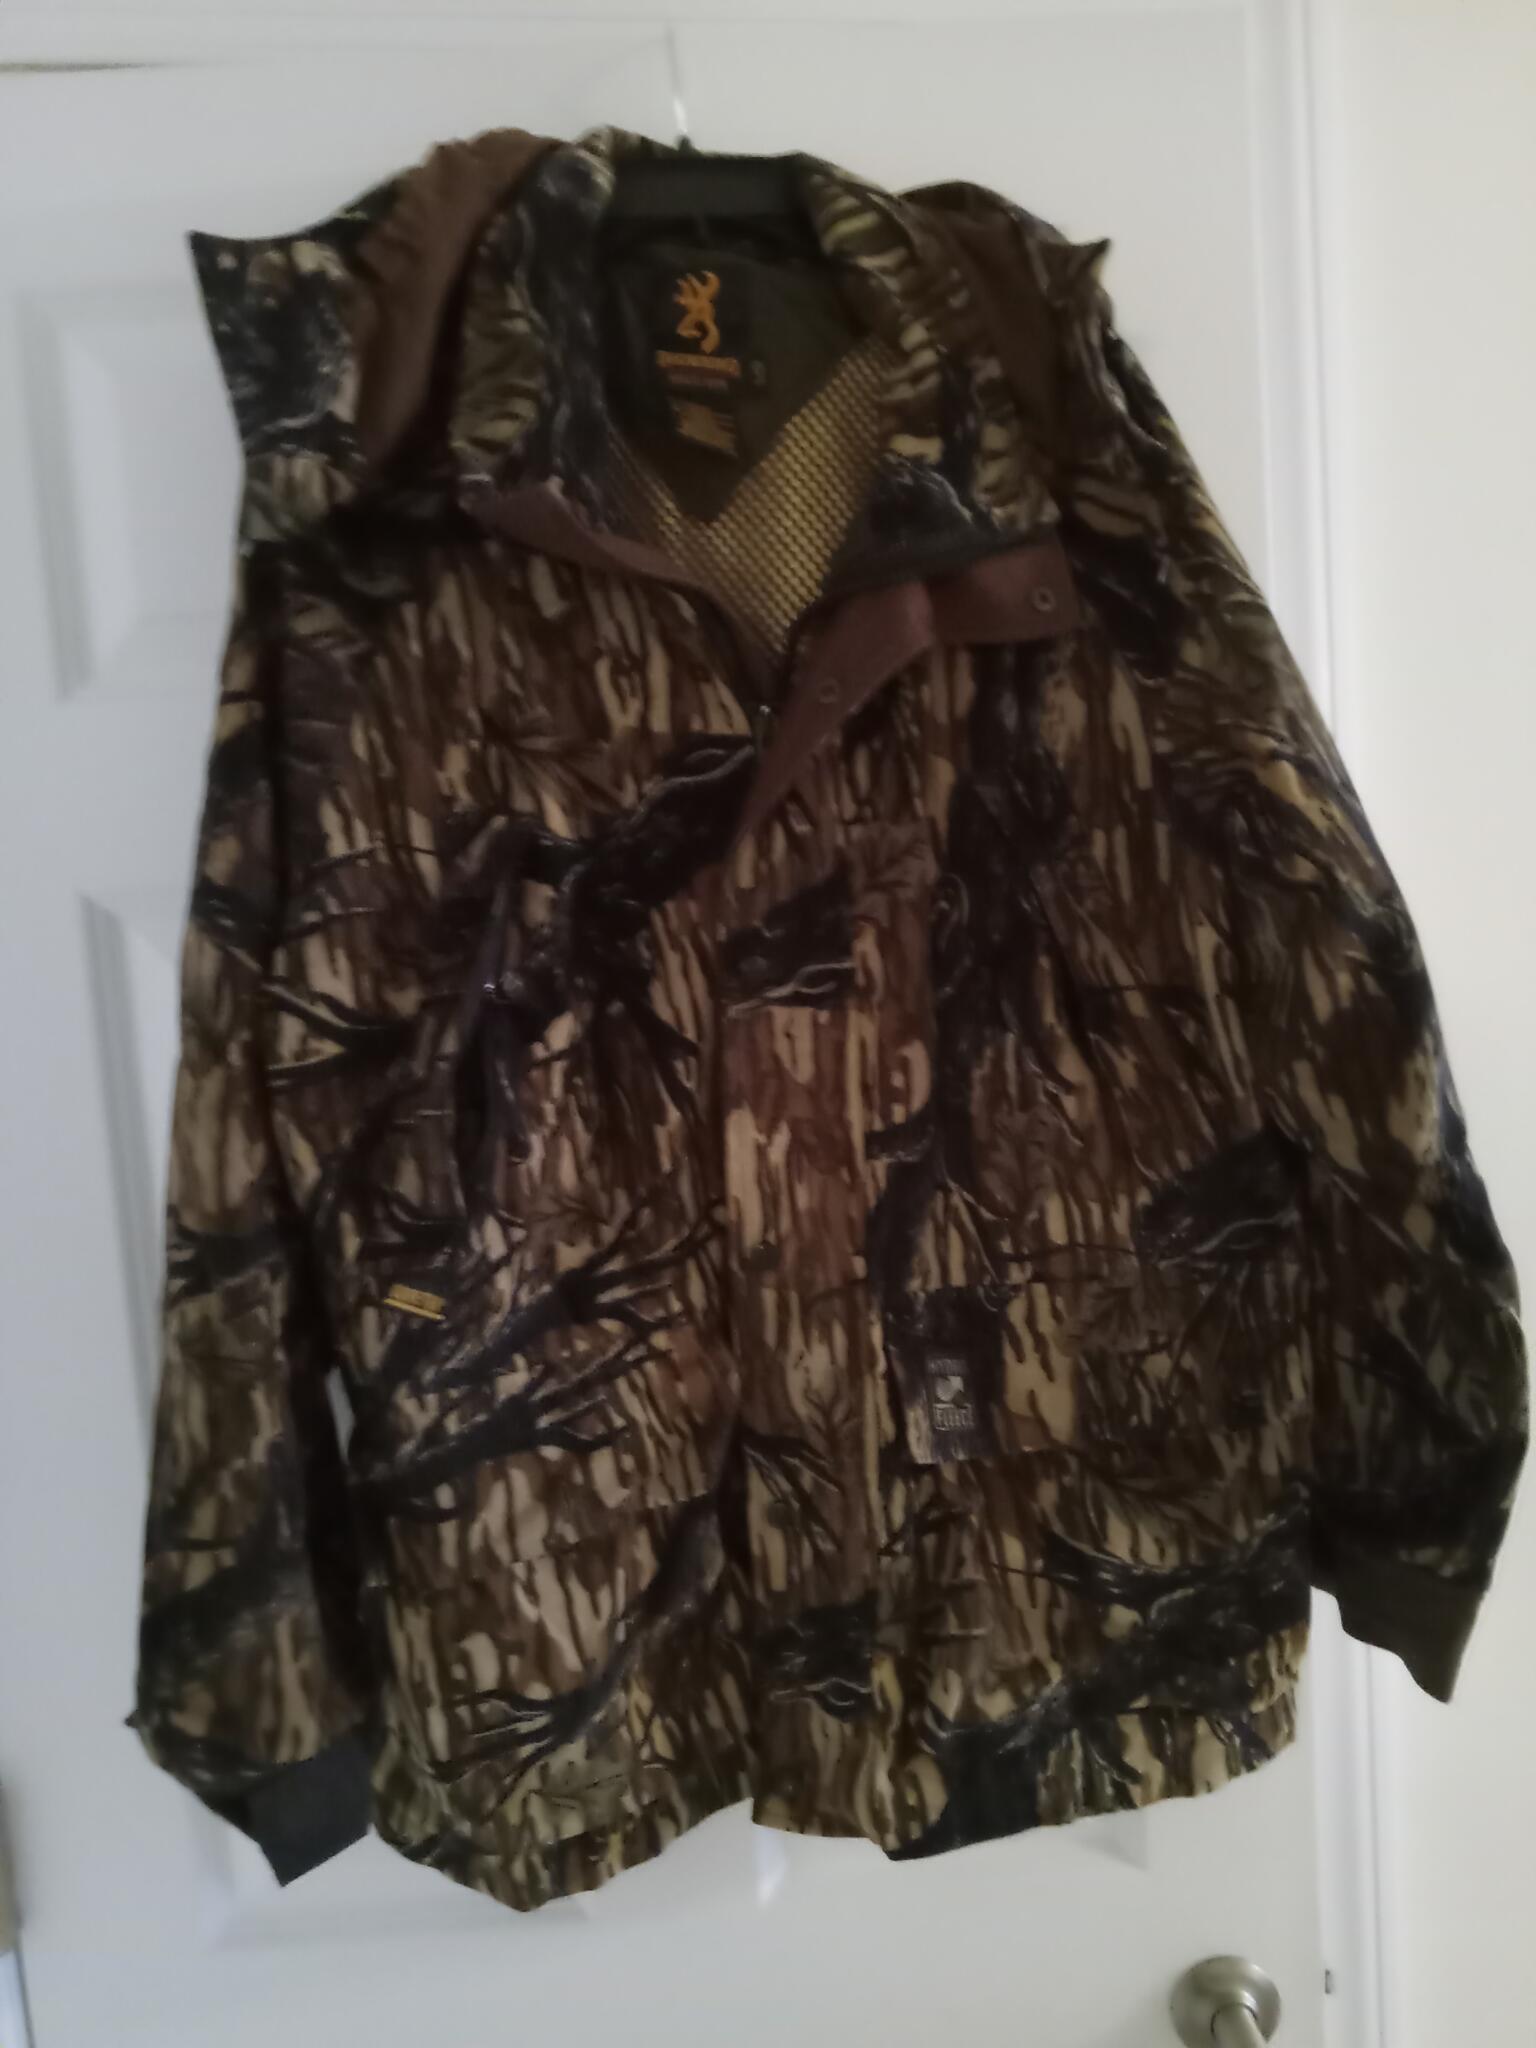 Hunting jackets, shirts, pants, sox's, vest, hat, gloves. for $10 in ...